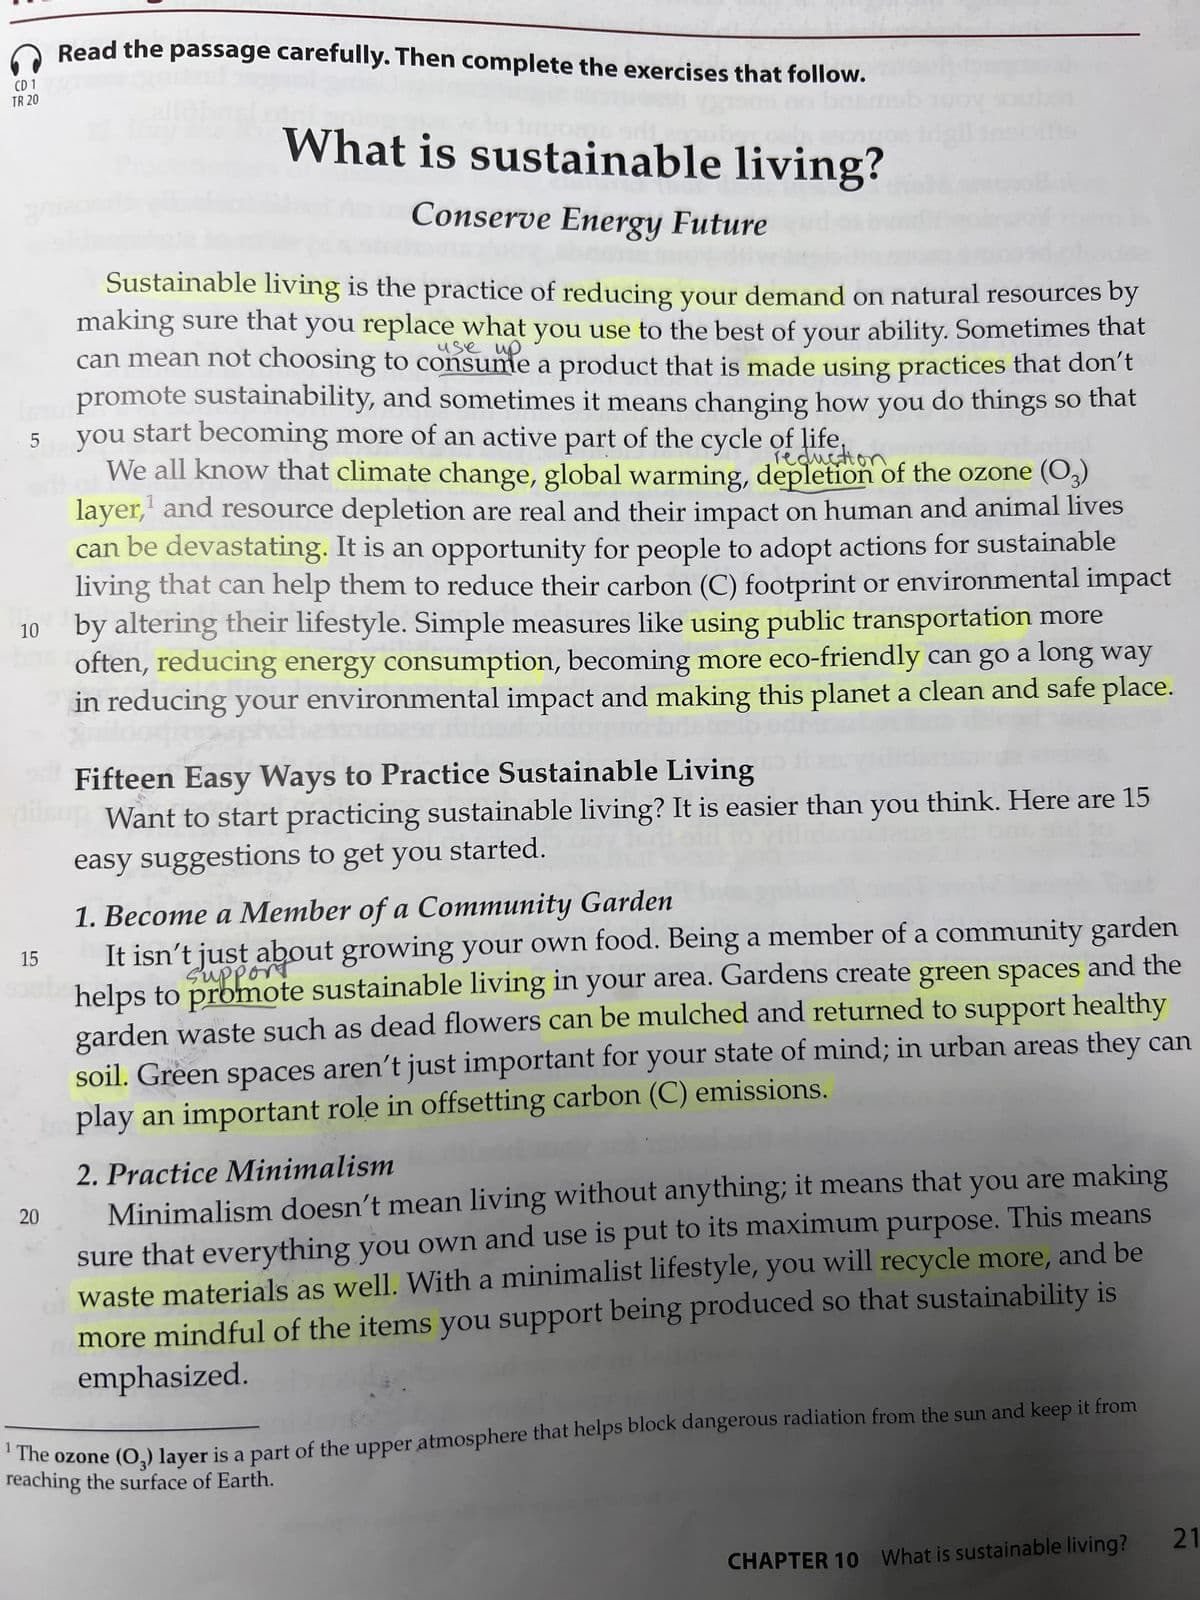 CD 1
TR 20
LO
5
10
15
Read the passage carefully. Then complete the exercises that follow.
bran
20
What is sustainable living?
Conserve Energy Future de
use up
Sustainable living is the practice of reducing your demand on natural resources by
making sure that you replace what you use to the best of your ability. Sometimes that
can mean not choosing to consume a product that is made using practices that don't
promote sustainability, and sometimes it means changing how you do things so that
you start becoming more of an active part of the cycle of life.
reduction
We all know that climate change, global warming, depletion of the ozone (03)
layer, and resource depletion are real and their impact on human and animal lives
can be devastating. It is an opportunity for people to adopt actions for sustainable
living that can help them to reduce their carbon (C) footprint or environmental impact
by altering their lifestyle. Simple measures like using public transportation more
often, reducing energy consumption, becoming more eco-friendly can go a long way
in reducing your environmental impact and making this planet a clean and safe place.
Fifteen Easy Ways to Practice Sustainable Living
Want to start practicing sustainable living? It is easier than you think. Here are 15
easy suggestions to get you started.
1. Become a Member of a Community Garden
It isn't just about growing your own food. Being a member of a community garden
helps to promote sustainable living in your area. Gardens create green spaces and the
garden waste such as dead flowers can be mulched and returned to support healthy
soil. Green spaces aren't just important for your state of mind; in urban areas they can
play an important role in offsetting carbon (C) emissions.
2. Practice Minimalism
Minimalism doesn't mean living without anything; it means that you are making
sure that everything you own and use is put to its maximum purpose. This means
of waste materials as well. With a minimalist lifestyle, you will recycle more, and be
more mindful of the items you support being produced so that sustainability is
emphasized.
The ozone (03) layer is a part of the upper atmosphere that helps block dangerous radiation from the sun and keep it from
reaching the surface of Earth.
CHAPTER 10 What is sustainable living? 21